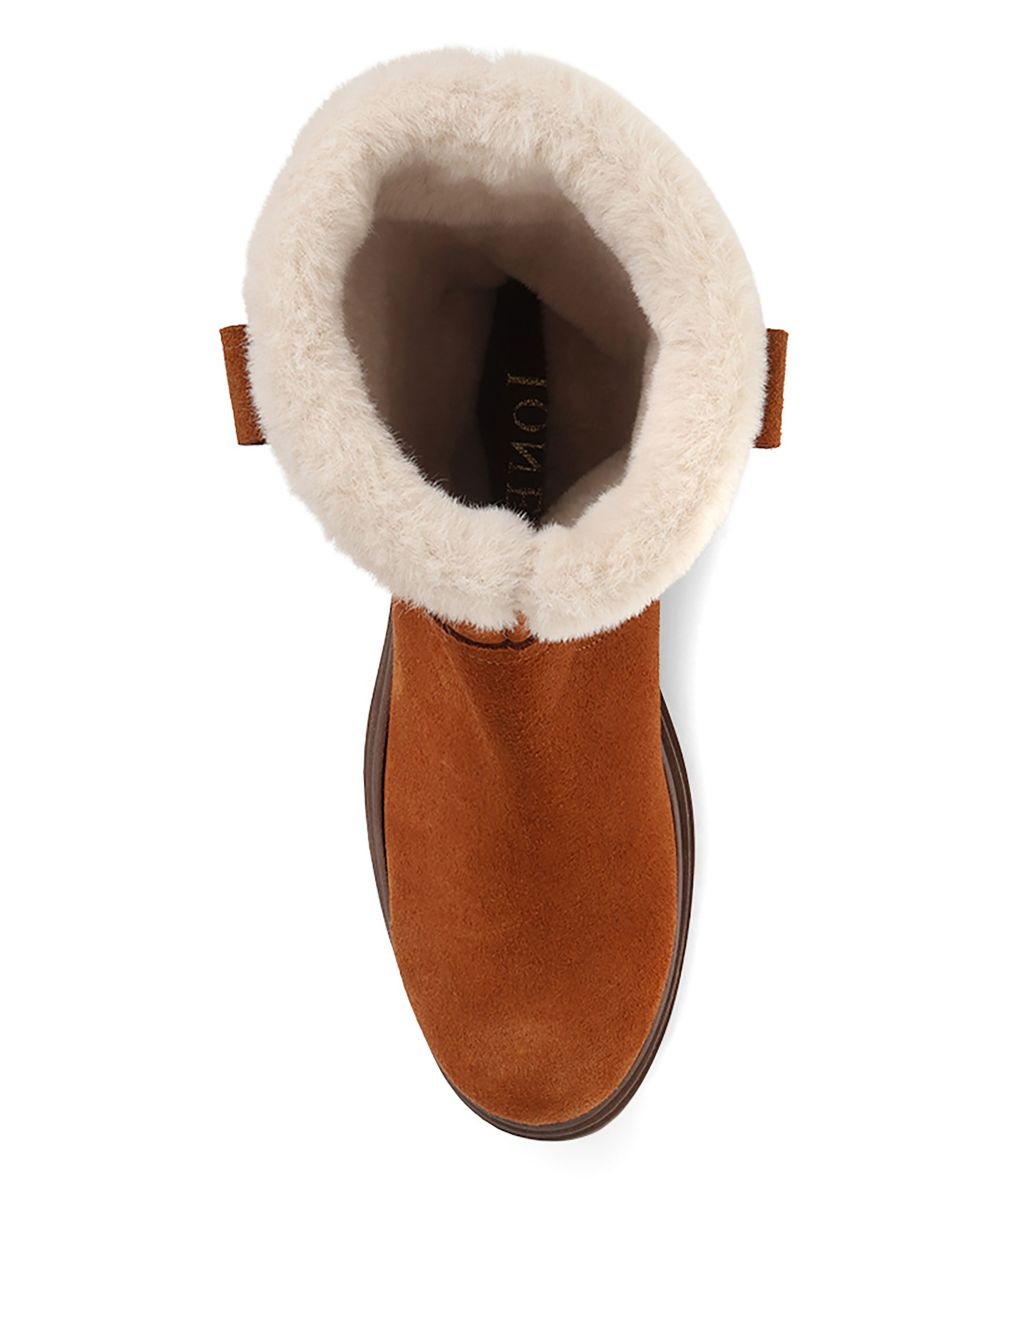 Chunky Suede Faux Fur Ankle Boots image 6